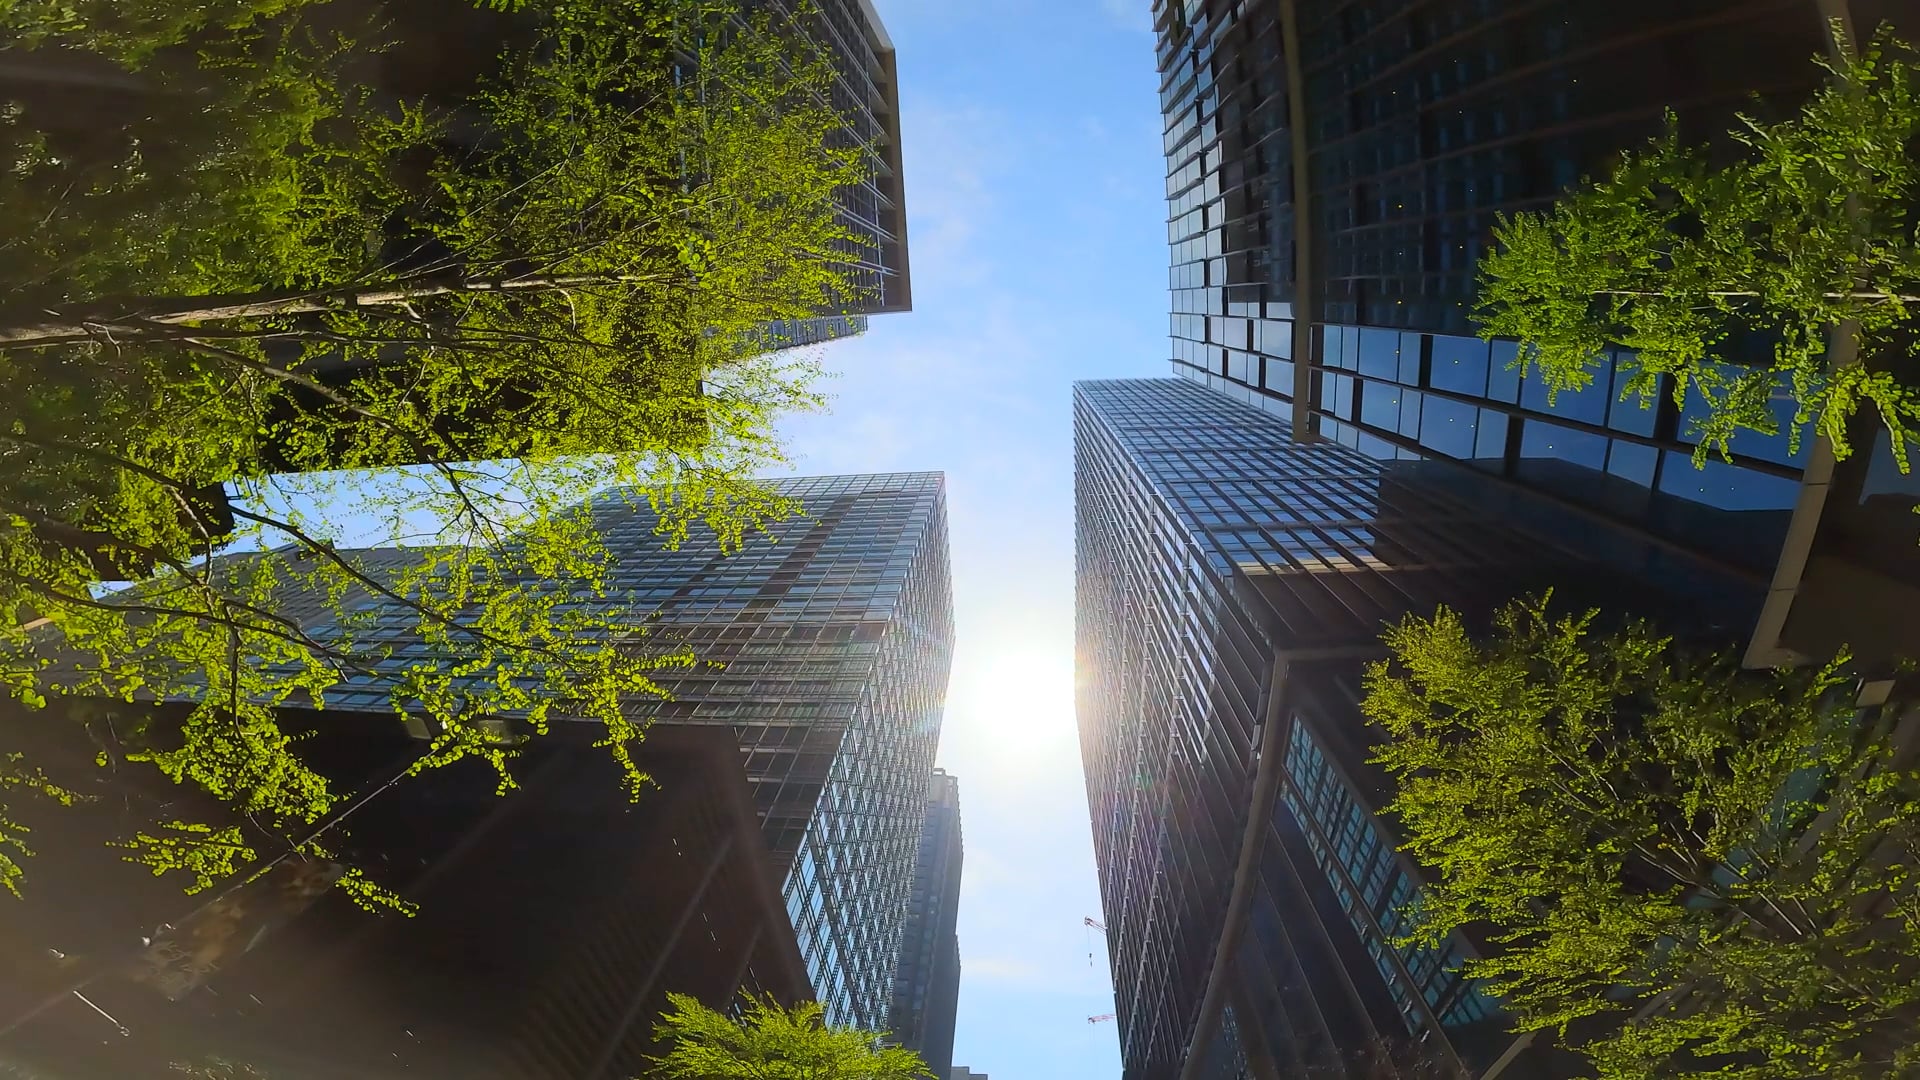 A view looking up at tall modern skyscrapers with reflective glass windows, set against a bright blue sky with the sun shining between the buildings. Green trees with fresh leaves frame the scene from below, adding a touch of nature to the urban setting.